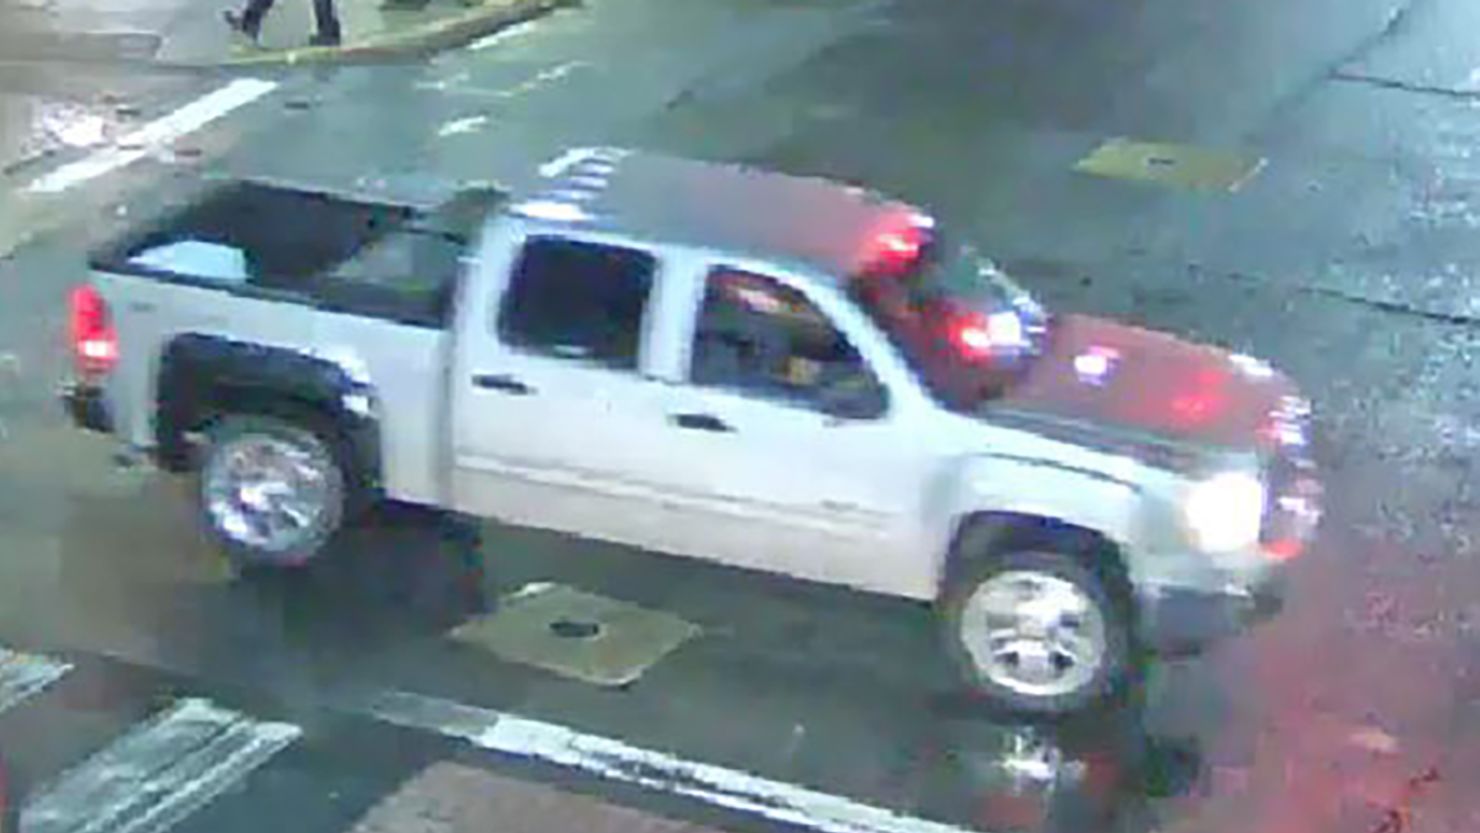 Police say tips led investigators to the pickup truck used in the alleged assault.